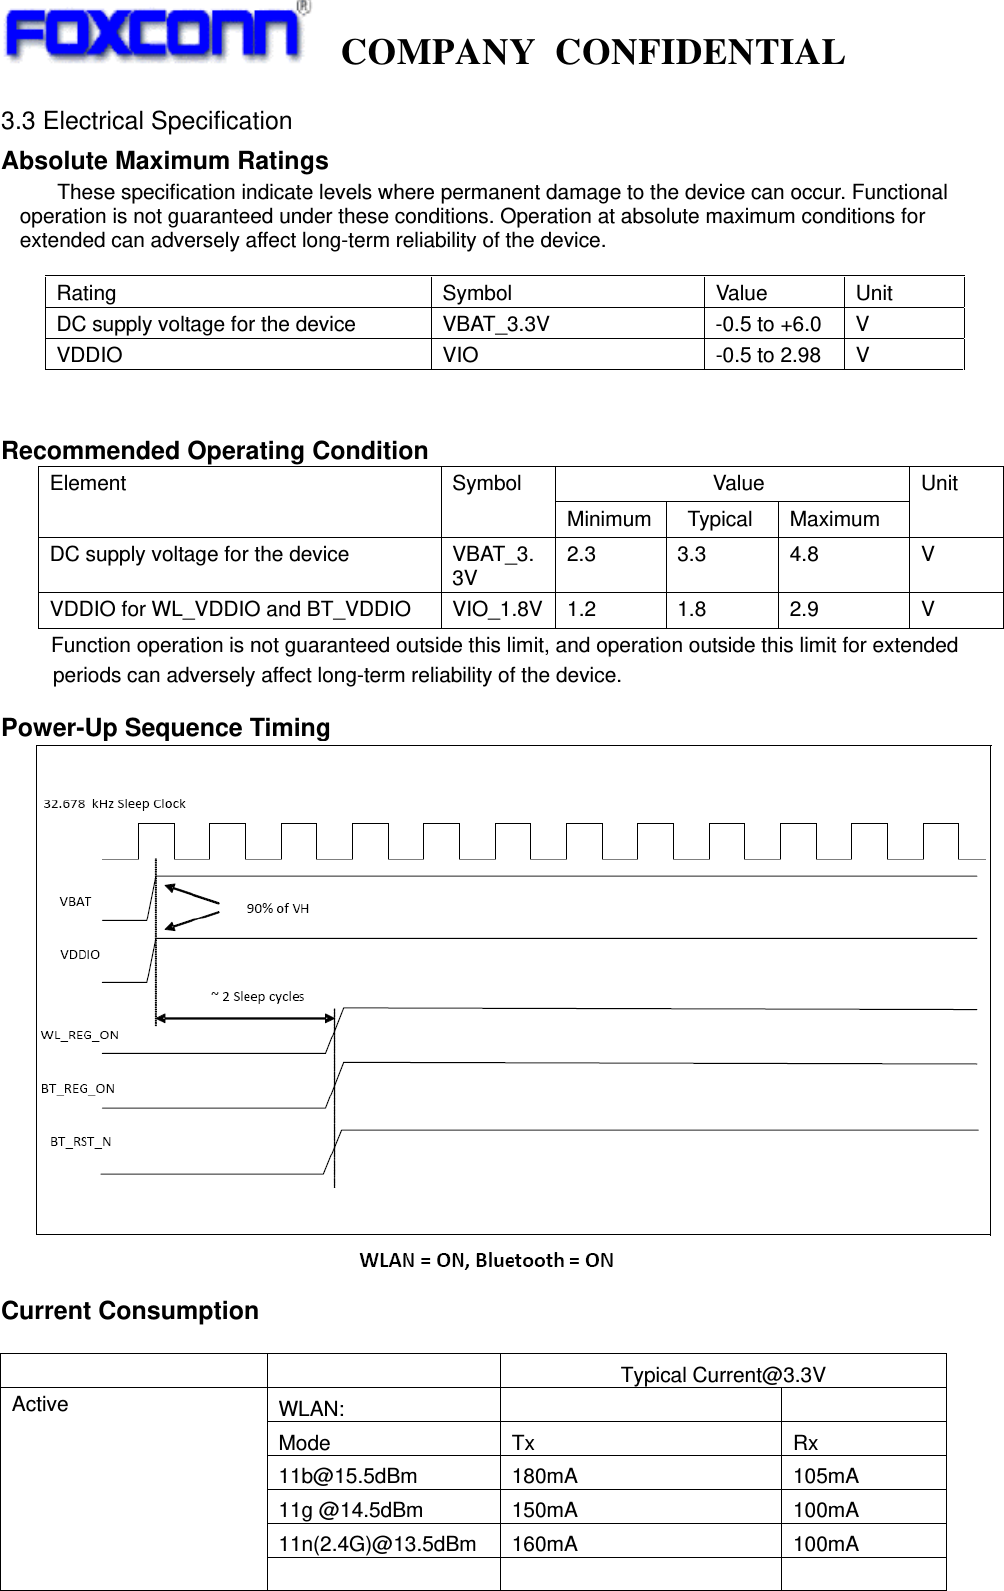   COMPANY CONFIDENTIAL             3.3 Electrical Specification Absolute Maximum Ratings    These specification indicate levels where permanent damage to the device can occur. Functional operation is not guaranteed under these conditions. Operation at absolute maximum conditions for extended can adversely affect long-term reliability of the device.   Recommended Operating Condition               Value Element Symbol Minimum  Typical  Maximum Unit DC supply voltage for the device  VBAT_3.3V 2.3 3.3 4.8  V VDDIO for WL_VDDIO and BT_VDDIO VIO_1.8V 1.2  1.8  2.9  V     Function operation is not guaranteed outside this limit, and operation outside this limit for extended           periods can adversely affect long-term reliability of the device.  Power-Up Sequence Timing   Current Consumption      Typical Current@3.3V WLAN:      Mode  Tx  Rx 11b@15.5dBm  180mA  105mA 11g @14.5dBm  150mA  100mA 11n(2.4G)@13.5dBm  160mA  100mA Active       Rating Symbol Value Unit DC supply voltage for the device  VBAT_3.3V  -0.5 to +6.0  V VDDIO  VIO  -0.5 to 2.98  V 